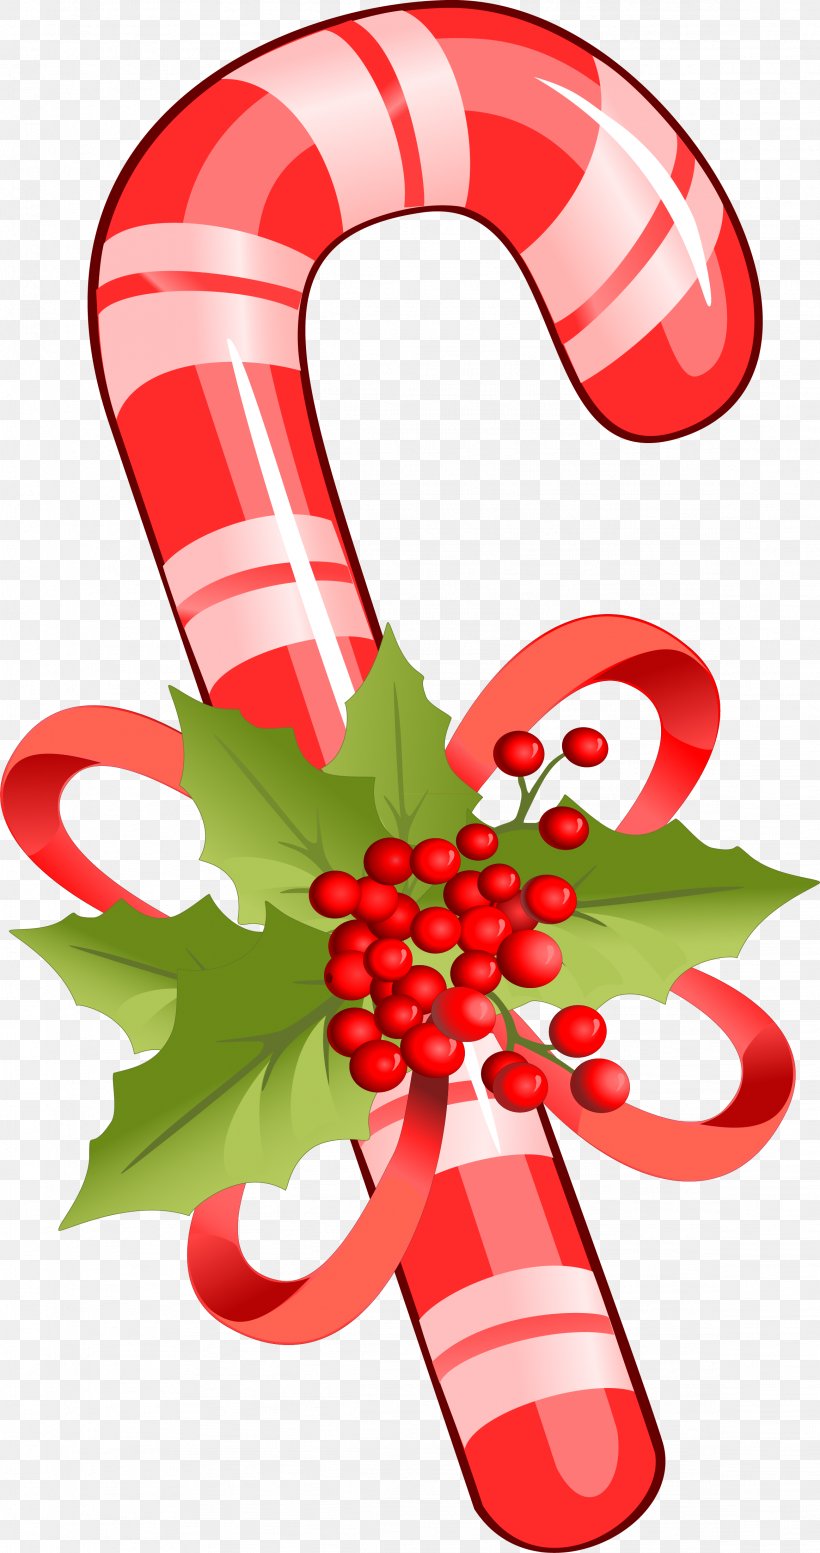 Candy Cane Stick Candy Ribbon Candy Clip Art Christmas Lollipop, PNG, 2326x4406px, Candy Cane, Candy, Candy Cane Christmas, Chocolate Bar, Christmas Download Free